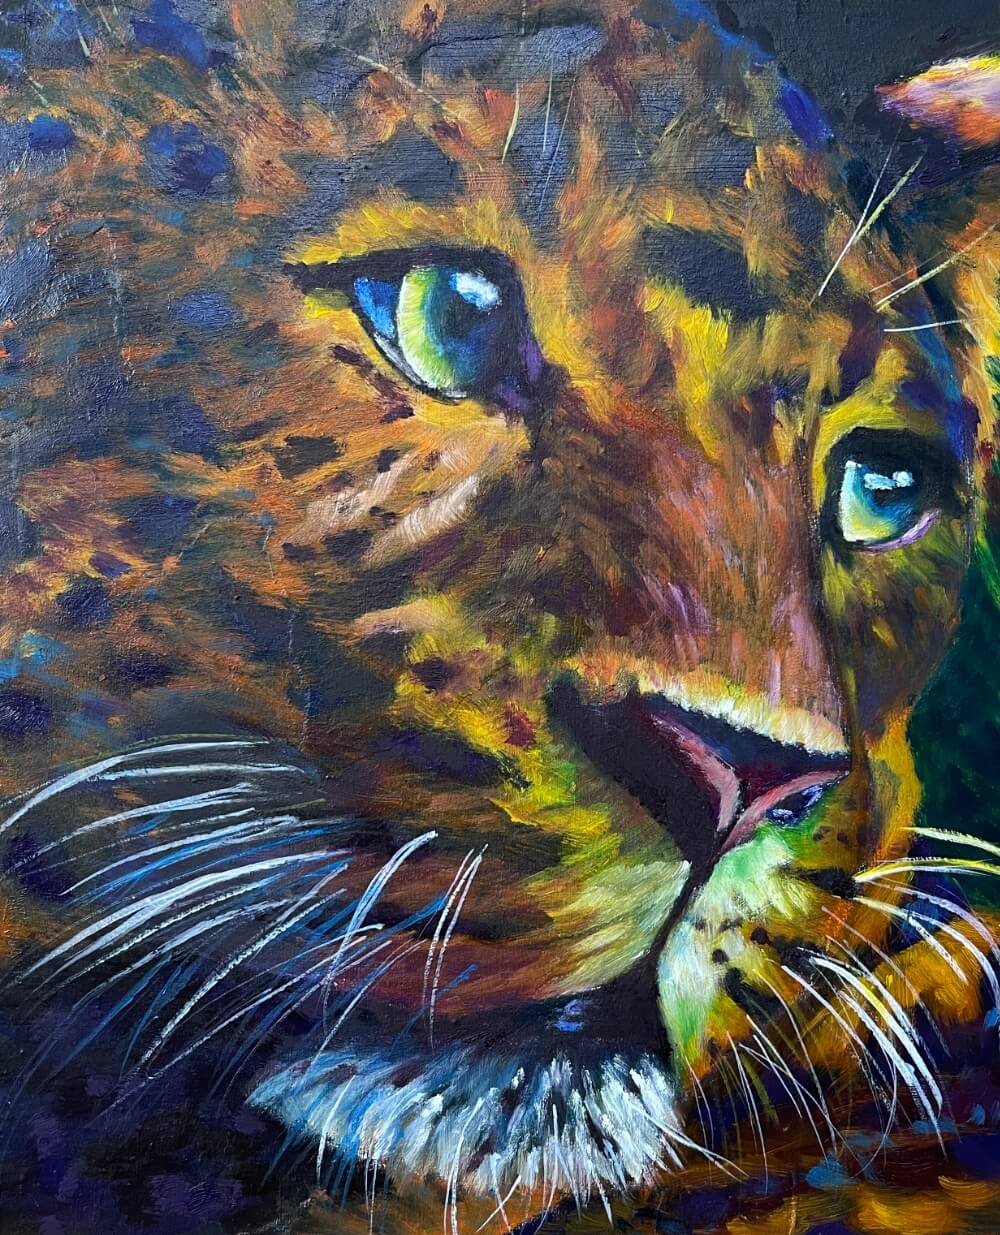 Original Oil Painting of a Leopard, Tan, Black & Yellow, 8" x 10" Painting on Wooden Panel